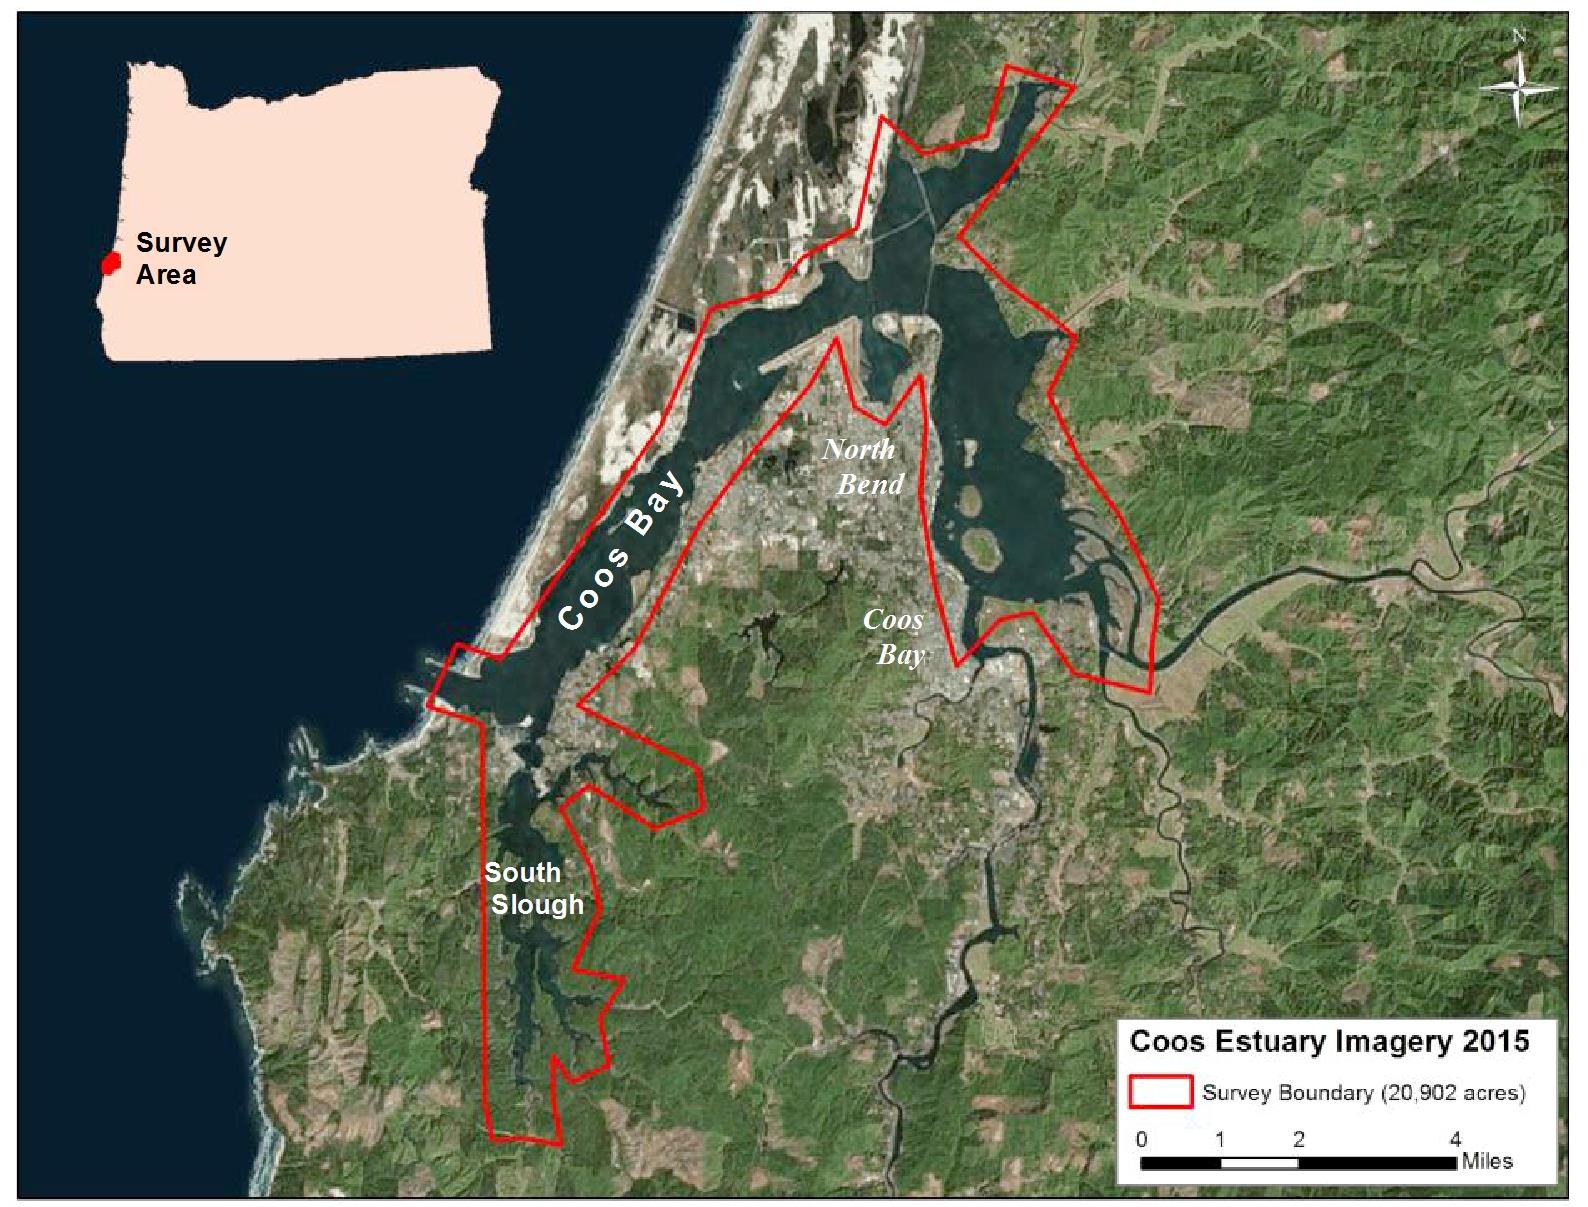 Eelgrass mapping of the Coos Estuary, Coos Bay, OR (2016)